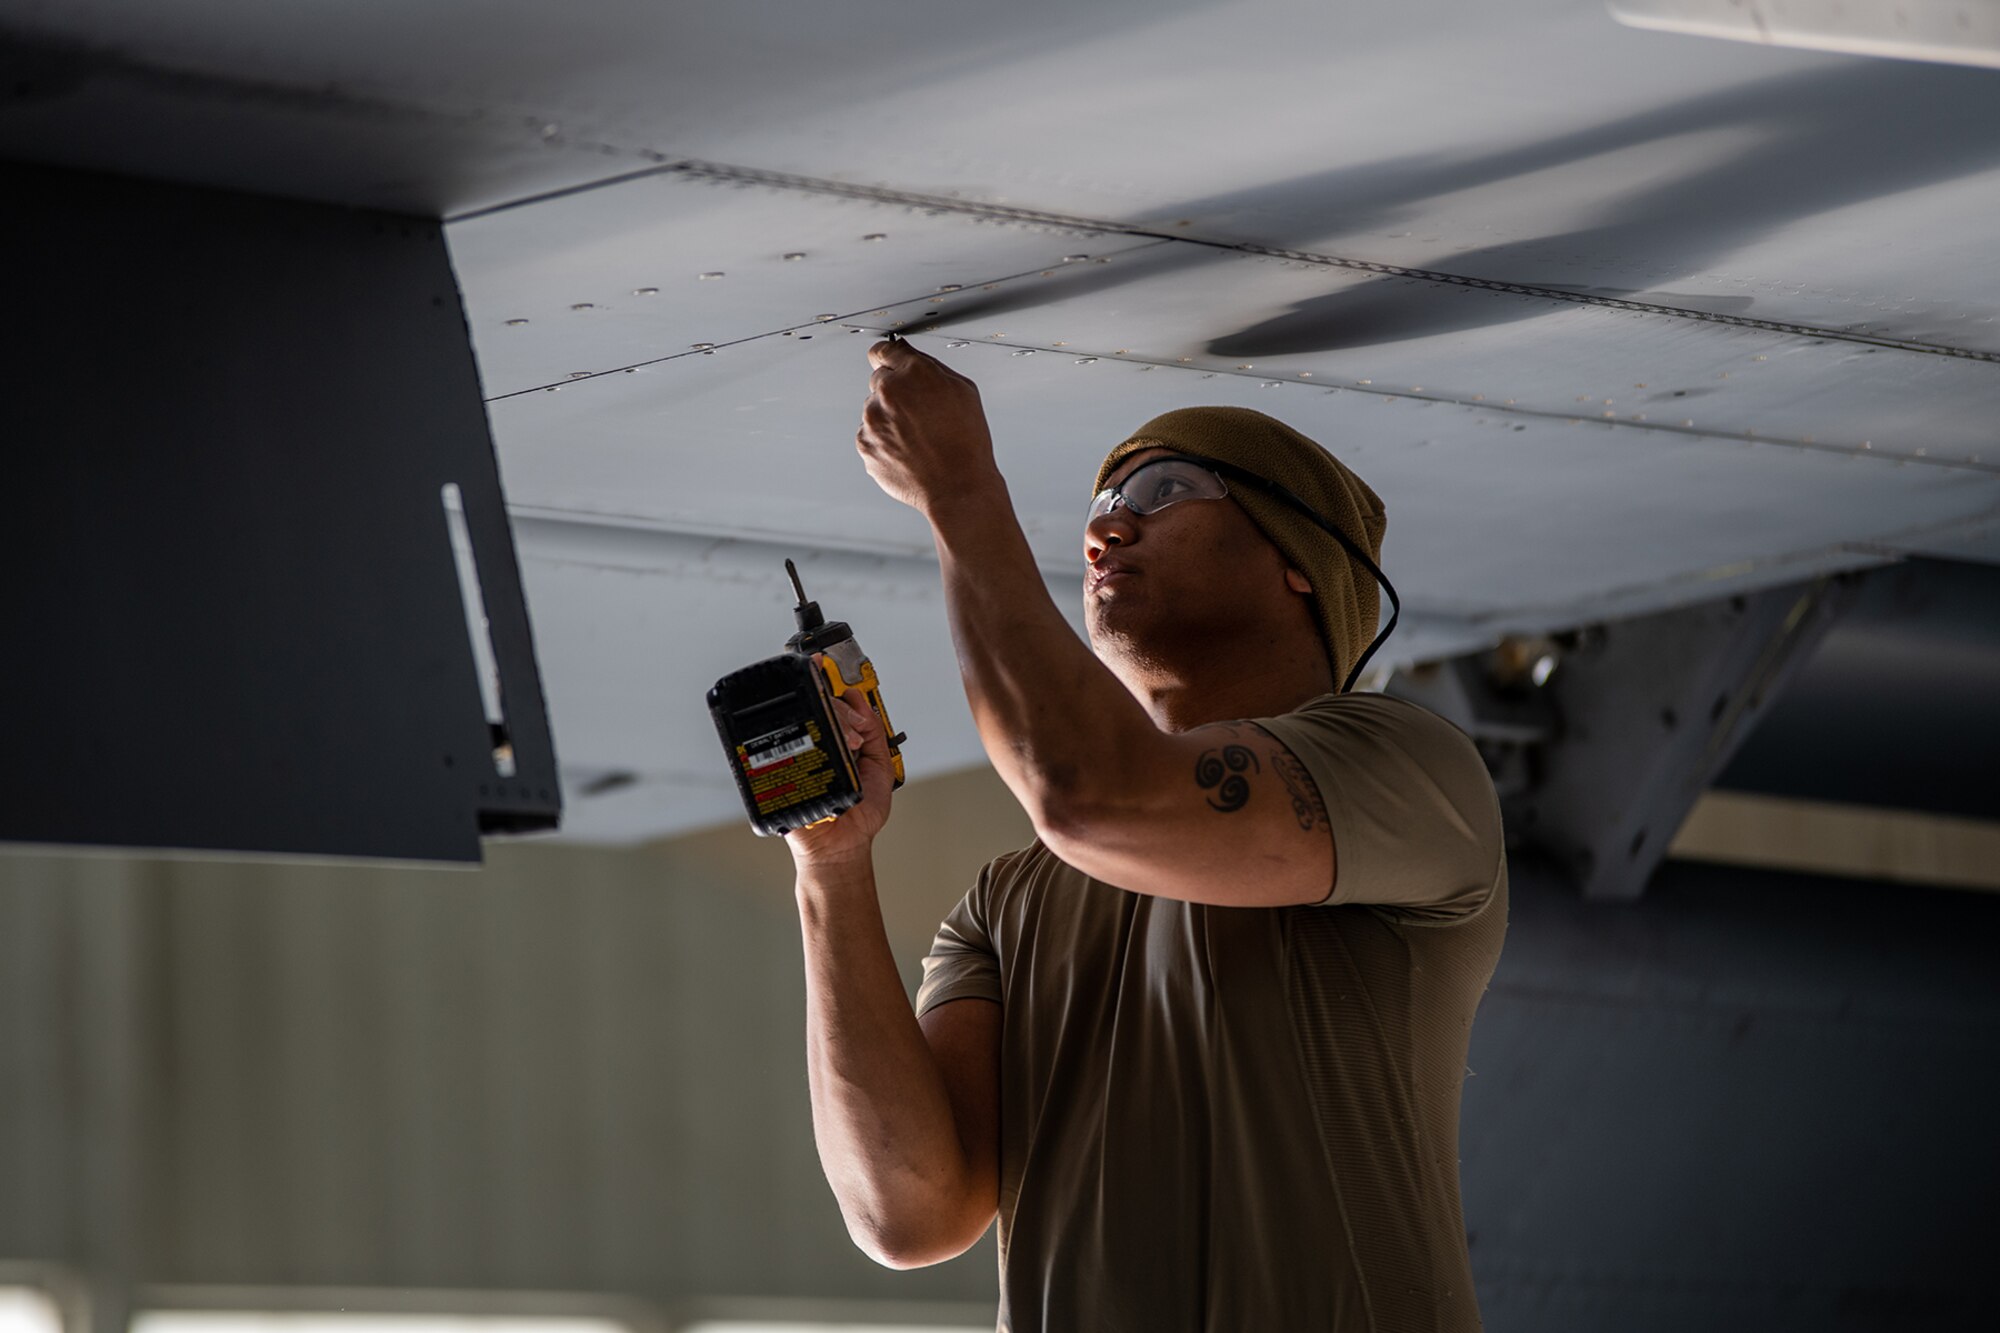 An aircraft maintainer removes a screw with a power drill from below a KC-135 wing.